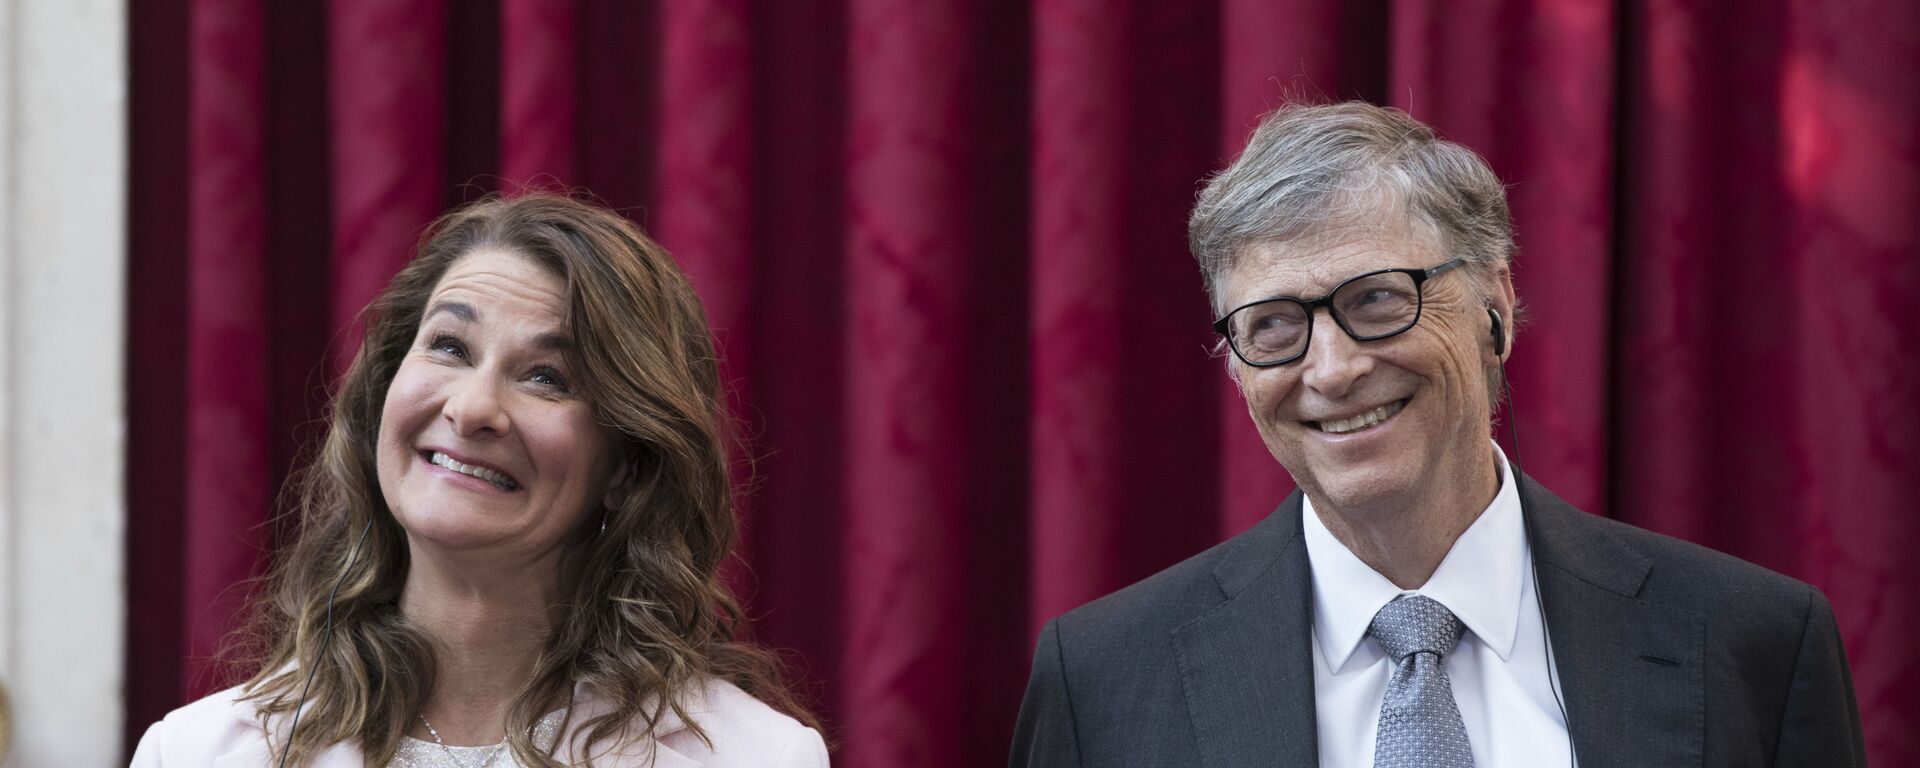  In this April 21, 2017, file photo, Philanthropist and co-founder of Microsoft, Bill Gates, right, and his wife Melinda react, prior to being awarded the Legion of Honour at the Elysee Palace in Paris - Sputnik International, 1920, 09.08.2021